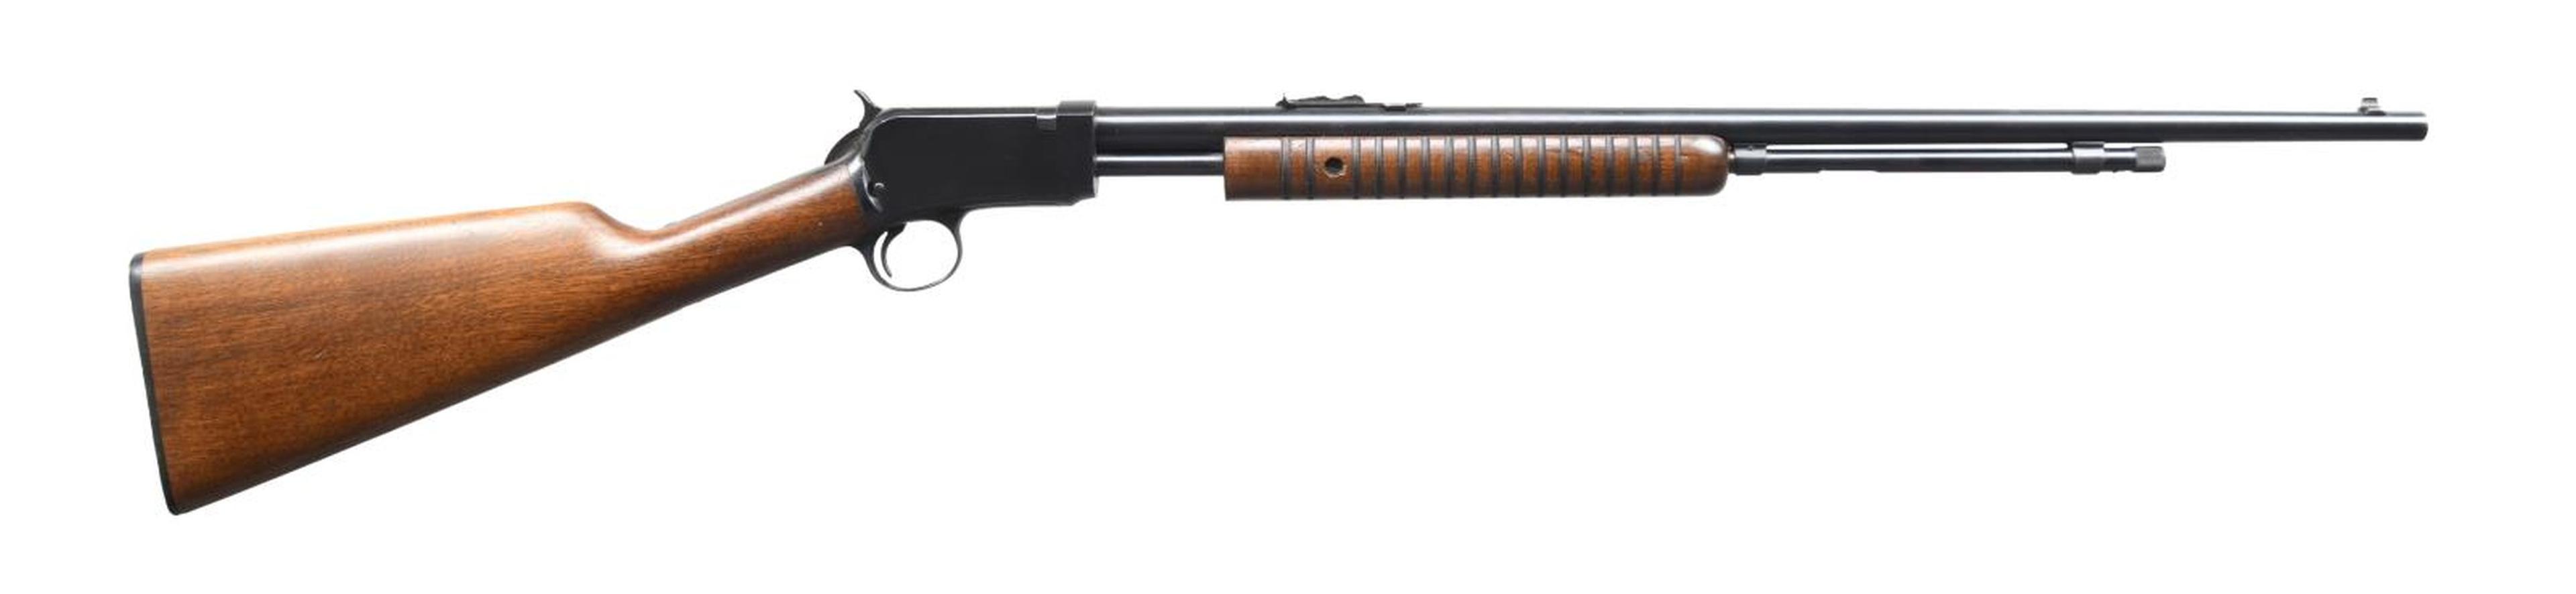 WINCHESTER 62 A RIFLE.